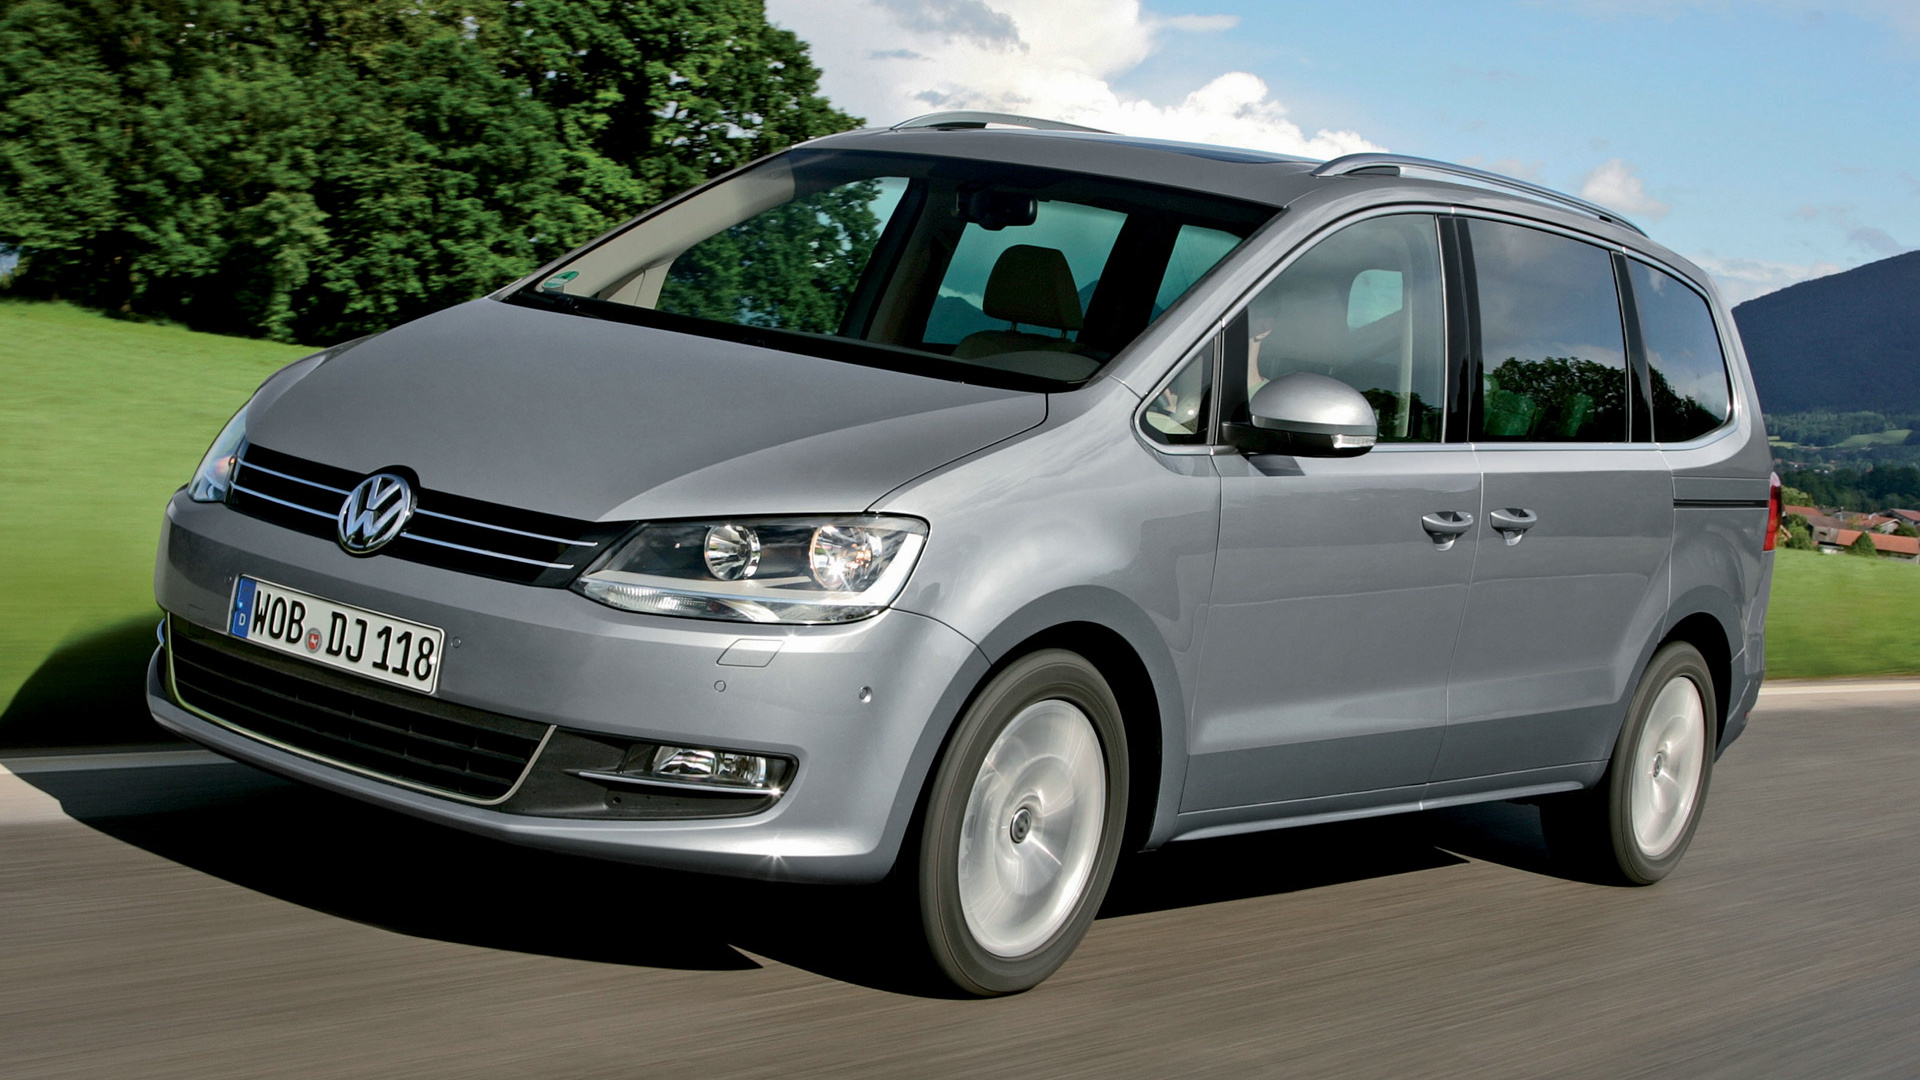 2010 Volkswagen Sharan Wallpapers and HD Images Car Pixel